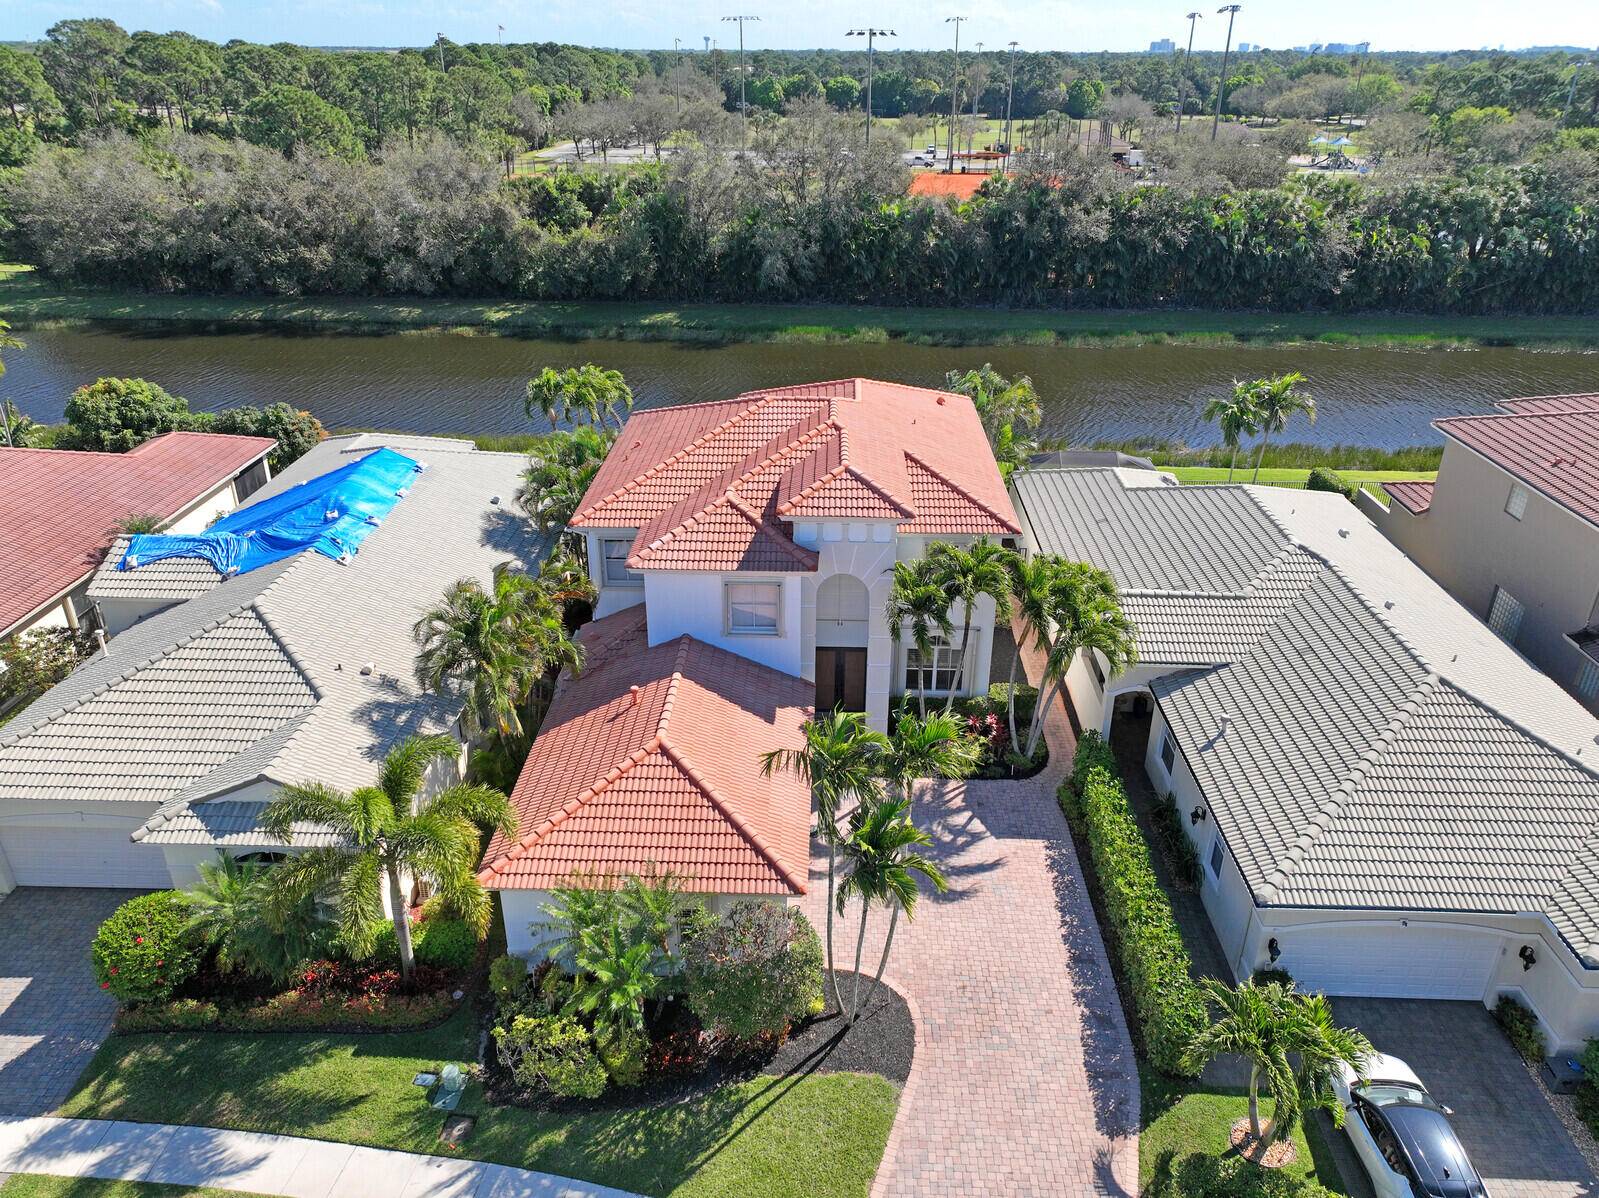 Don't miss your chance to own this Gorgeous and Highly sought after fully renovated Laguna Model on private lake with no neighbors backing your fenced property.